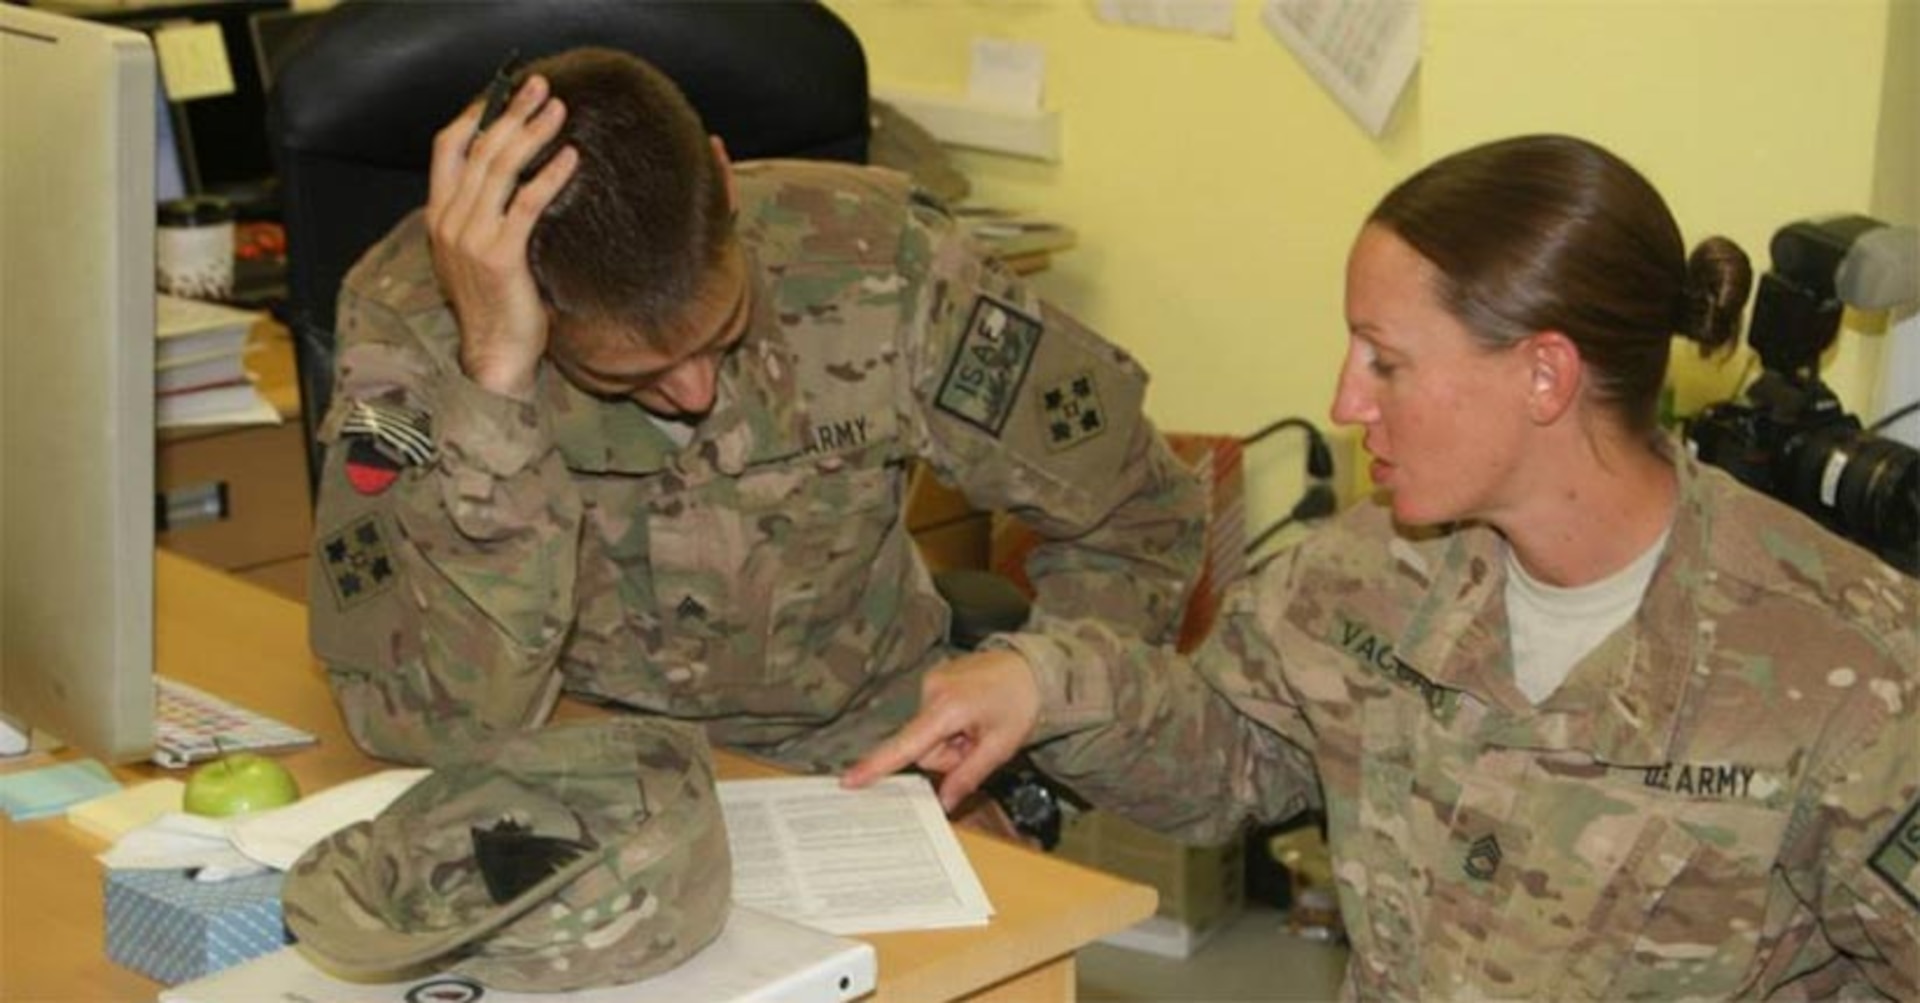 U.S. Army Sgt. 1st Class Danielle Vaccaro, a career counselor for headquarters and headquarters battalion, 4th Infantry Division, explains reenlistment options to U.S. Army Sgt. Eric Glassey, a public affairs operations noncommissioned officer, Kandahar, Afghanistan, Oct. 10, 2013.